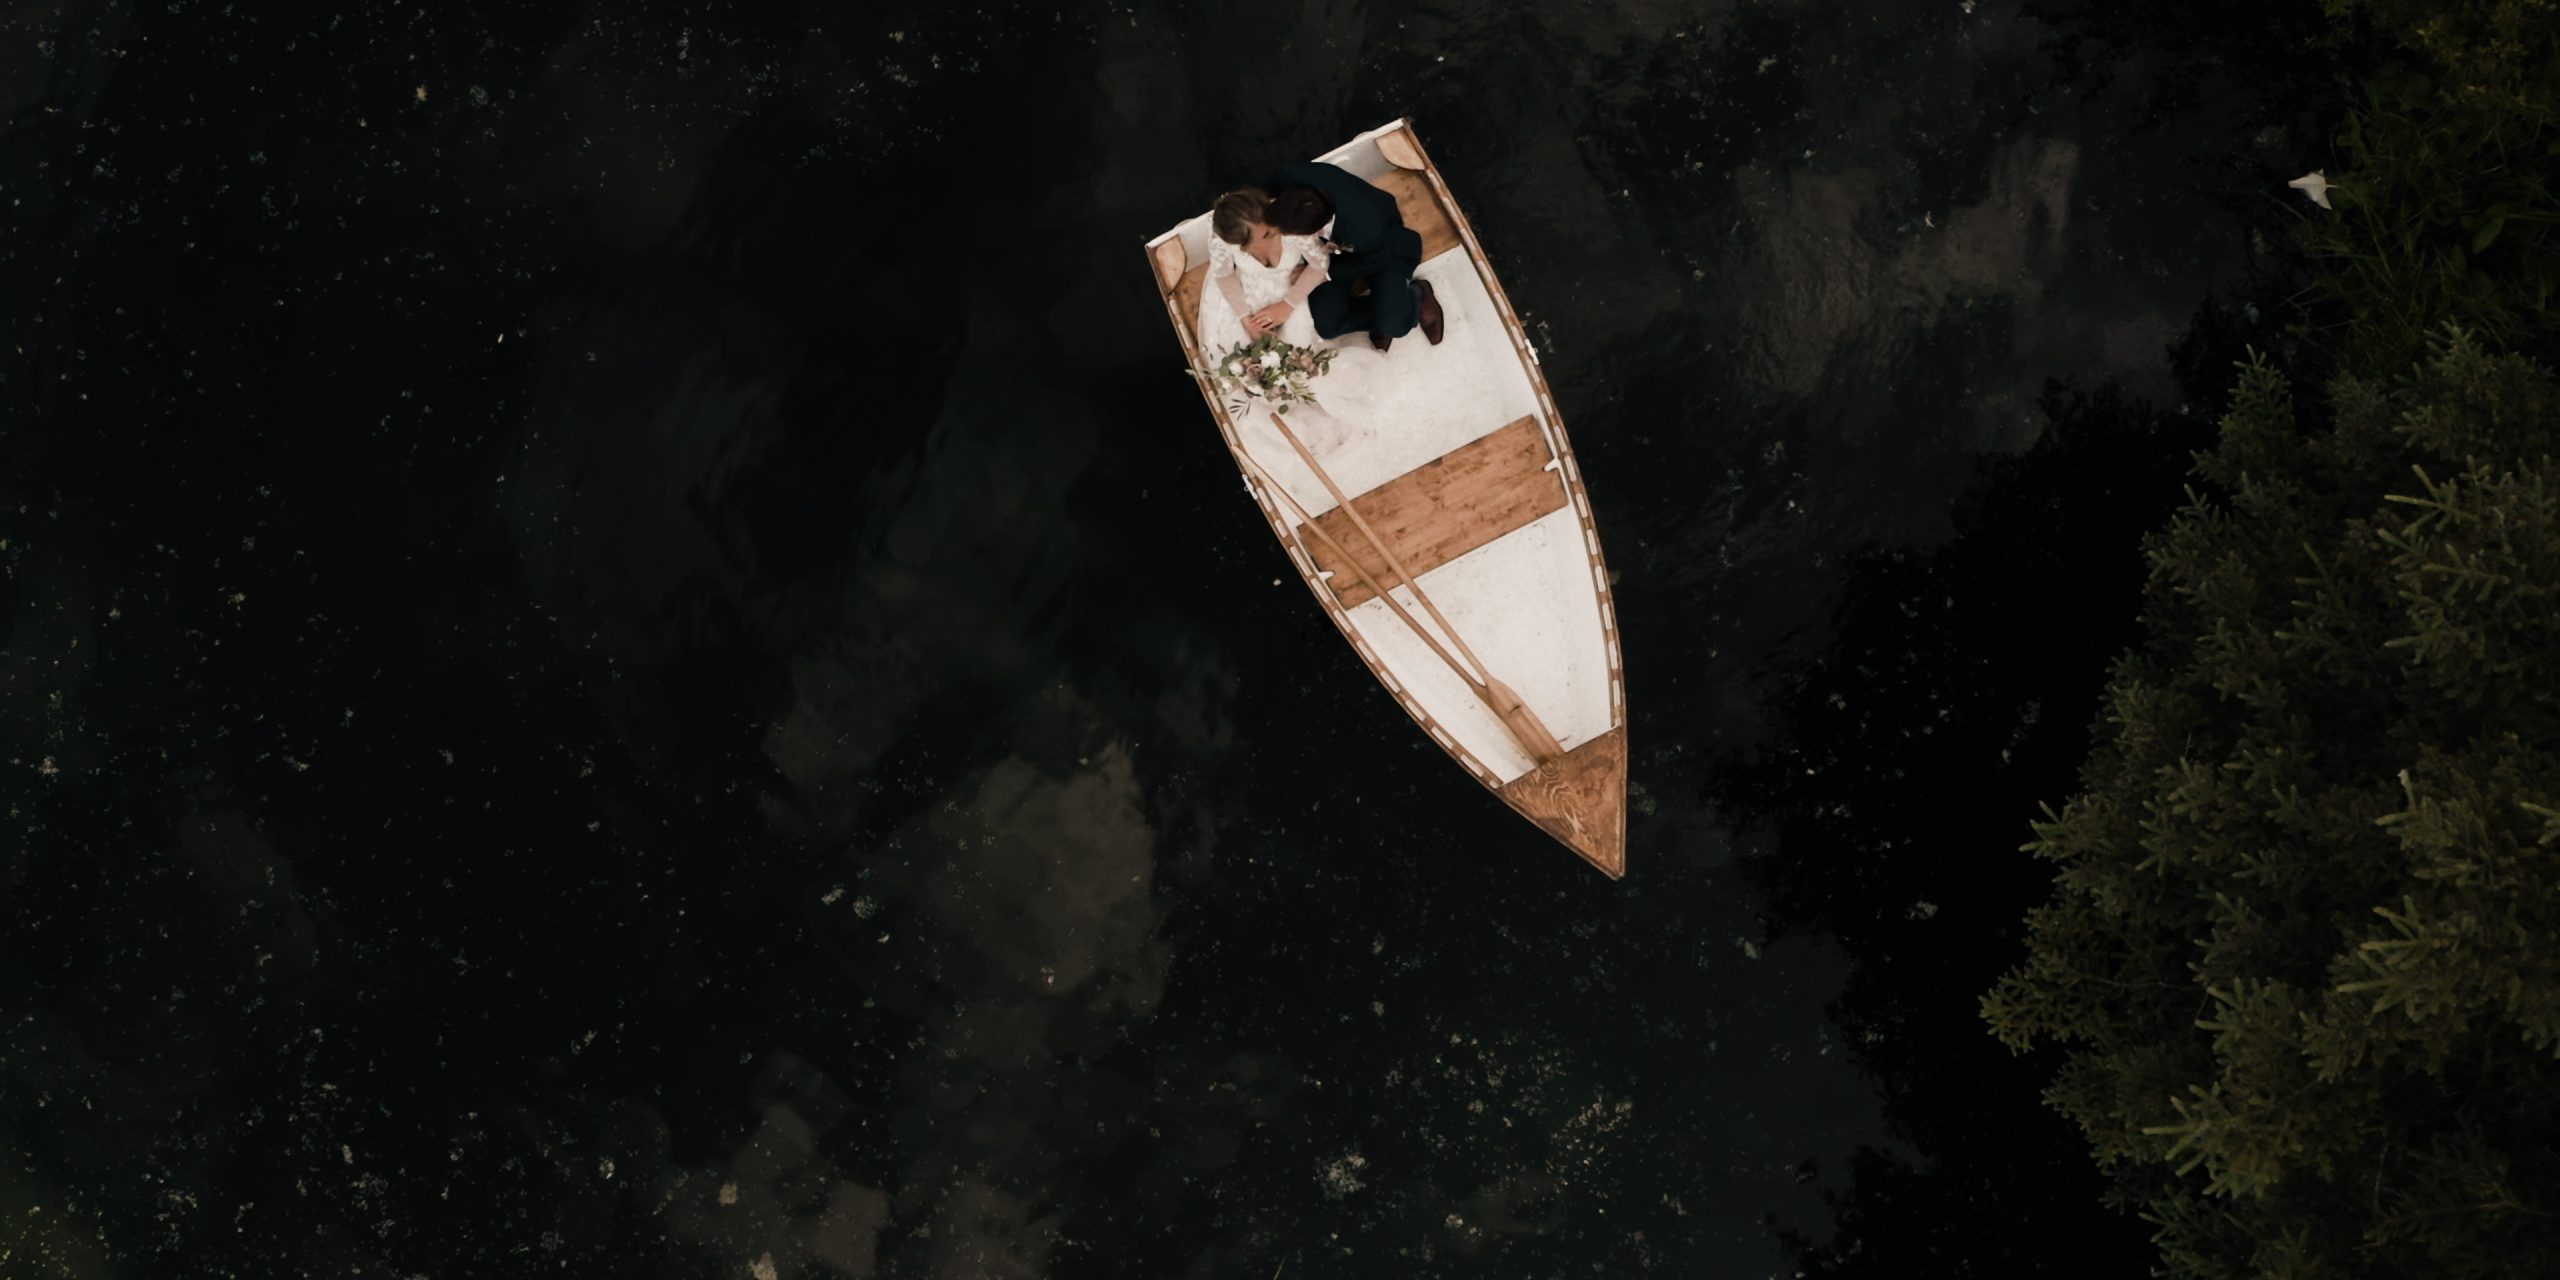 Drone WEDDING photograph of couple sitting on a boat in a pond